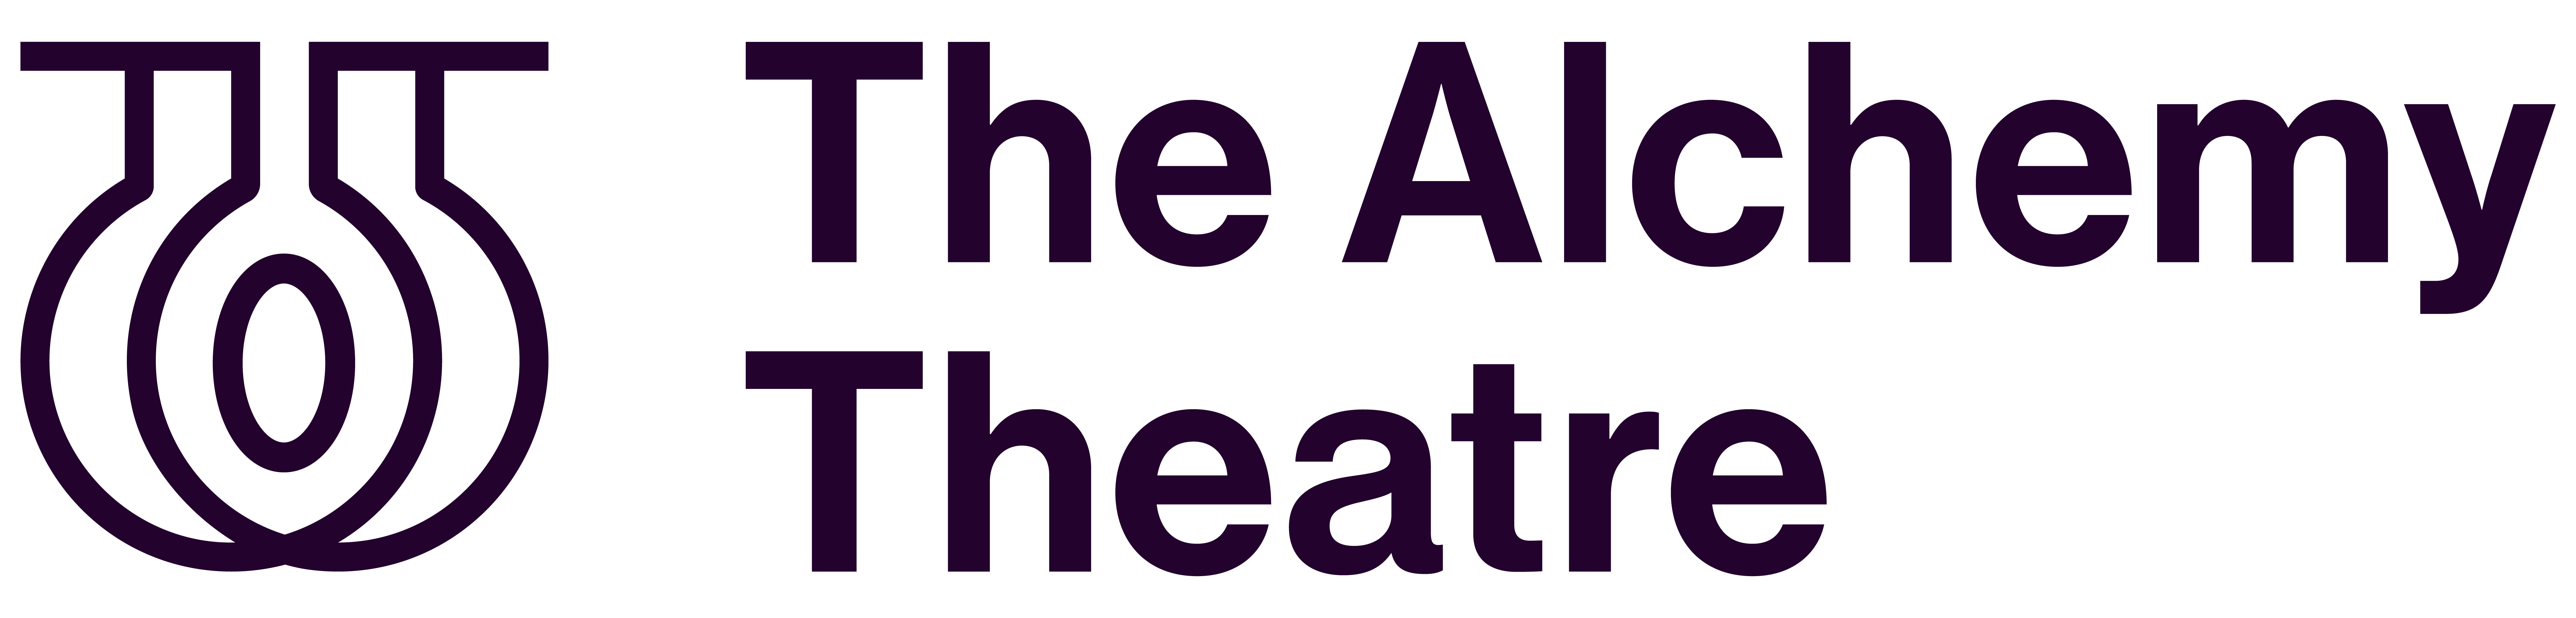 Special Events - The Alchemy Theatre